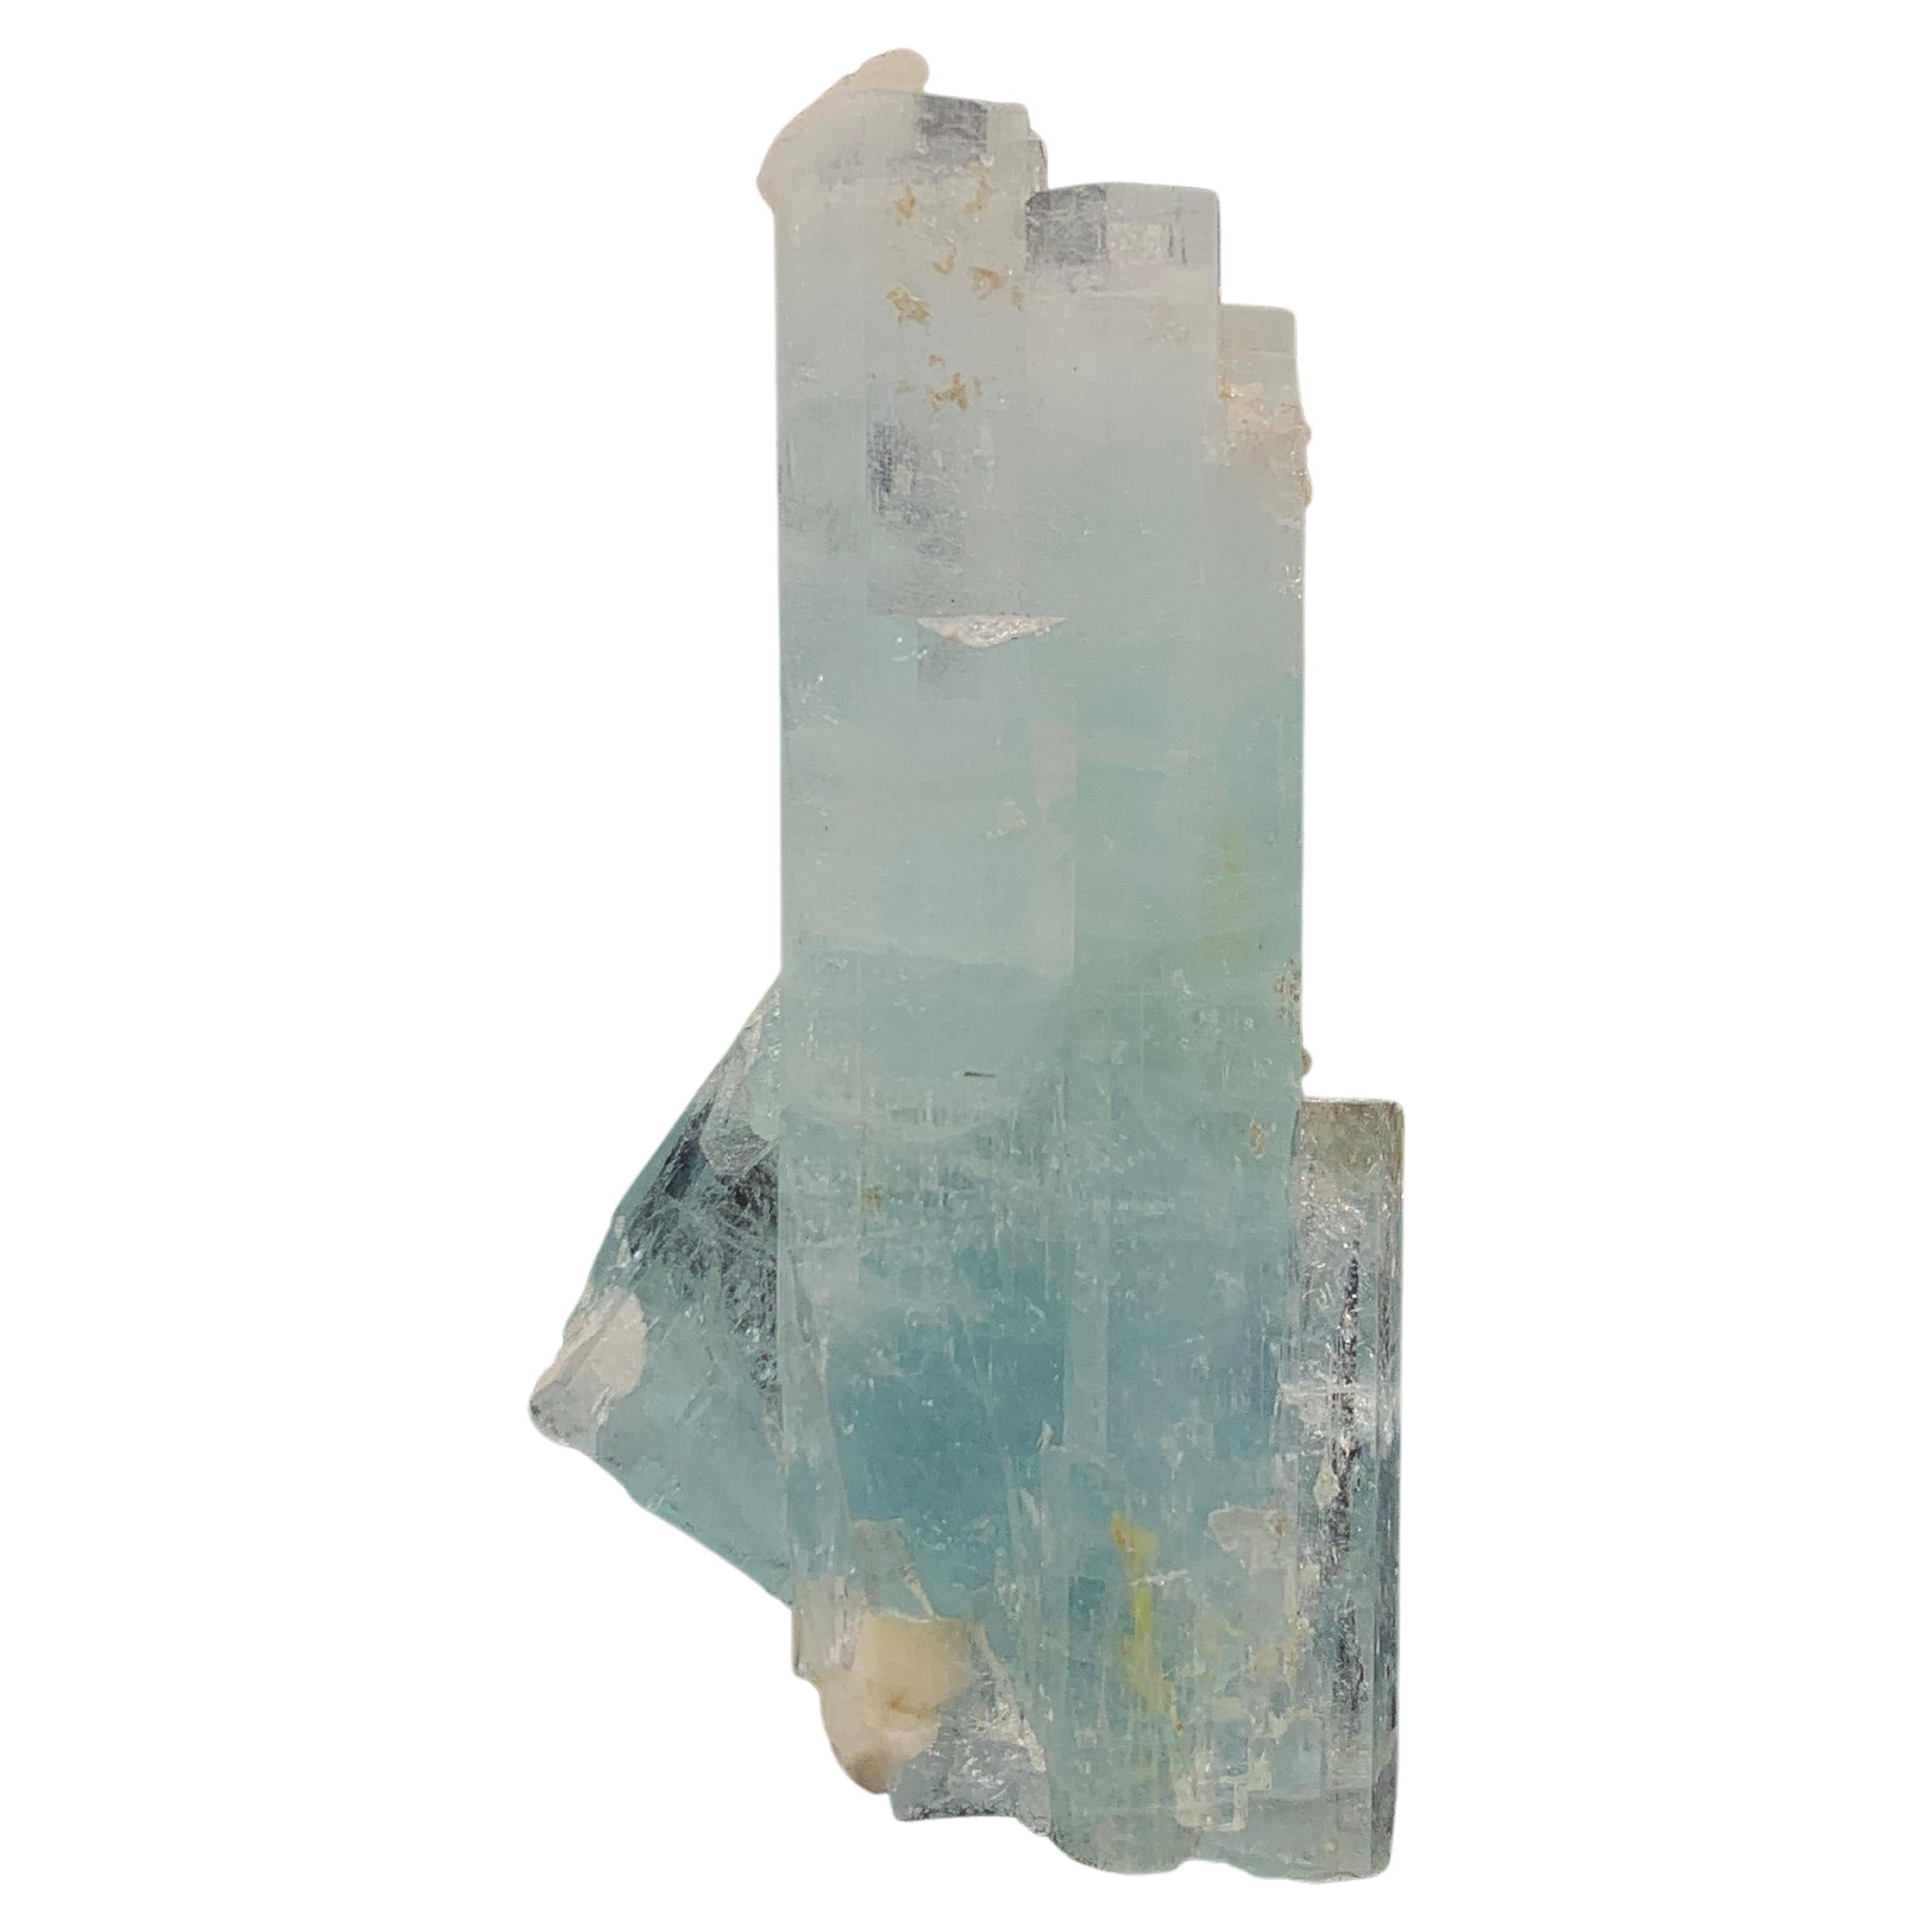 41.75 Gram Lovely Aquamarine Crystals From Shigar Valley, Pakistan  For Sale